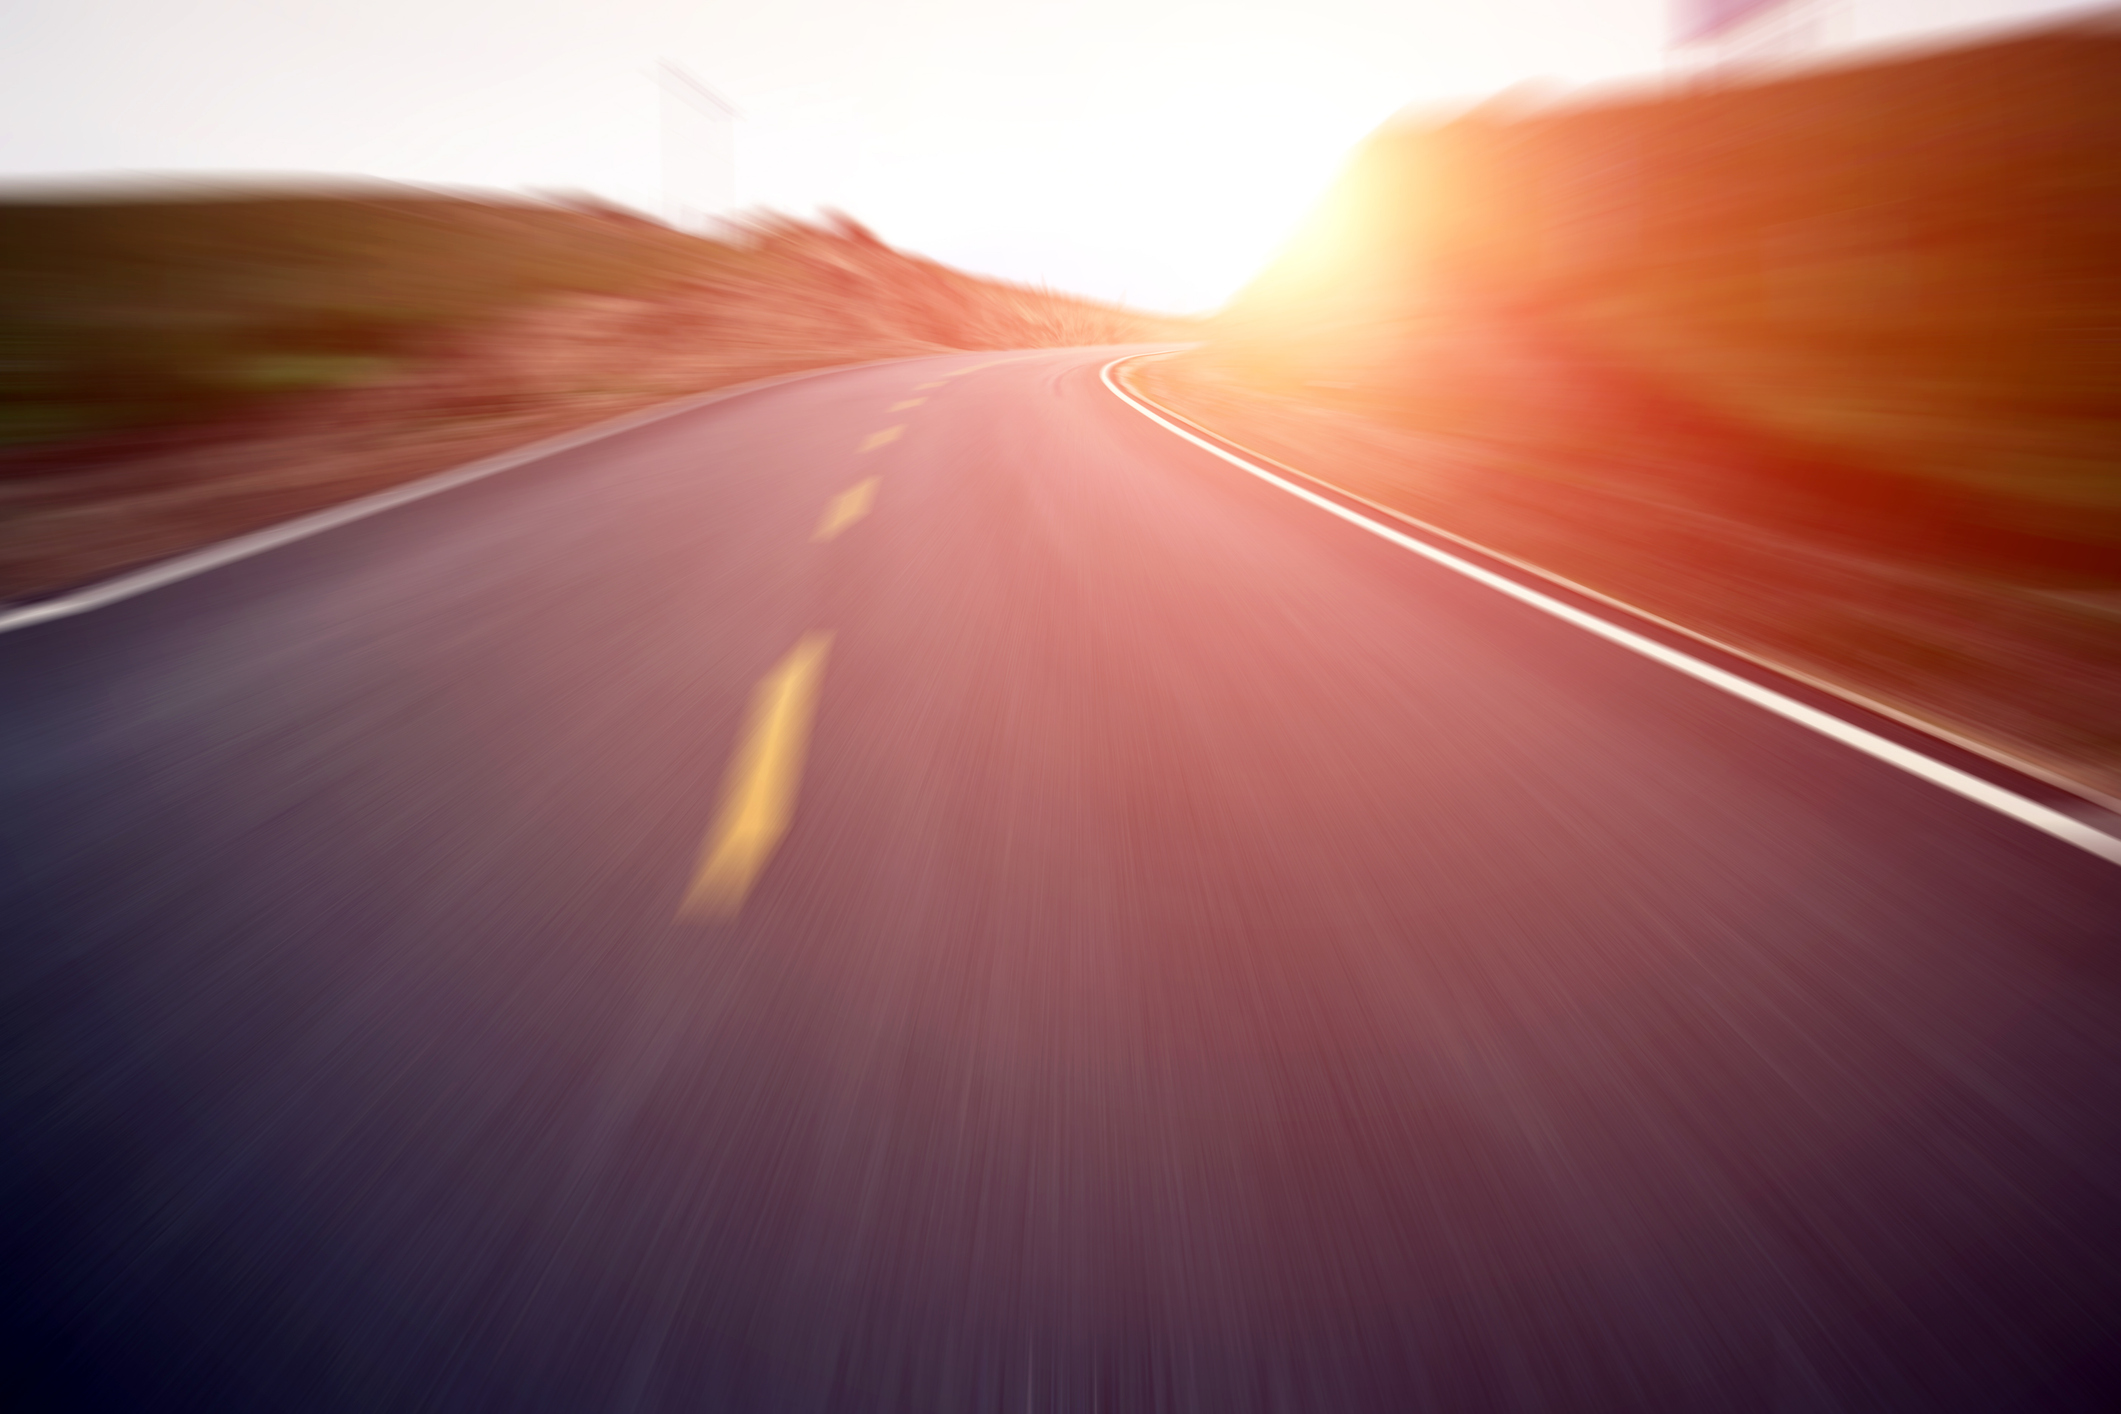 A motion blurred view of a road with the sun low on the horizon